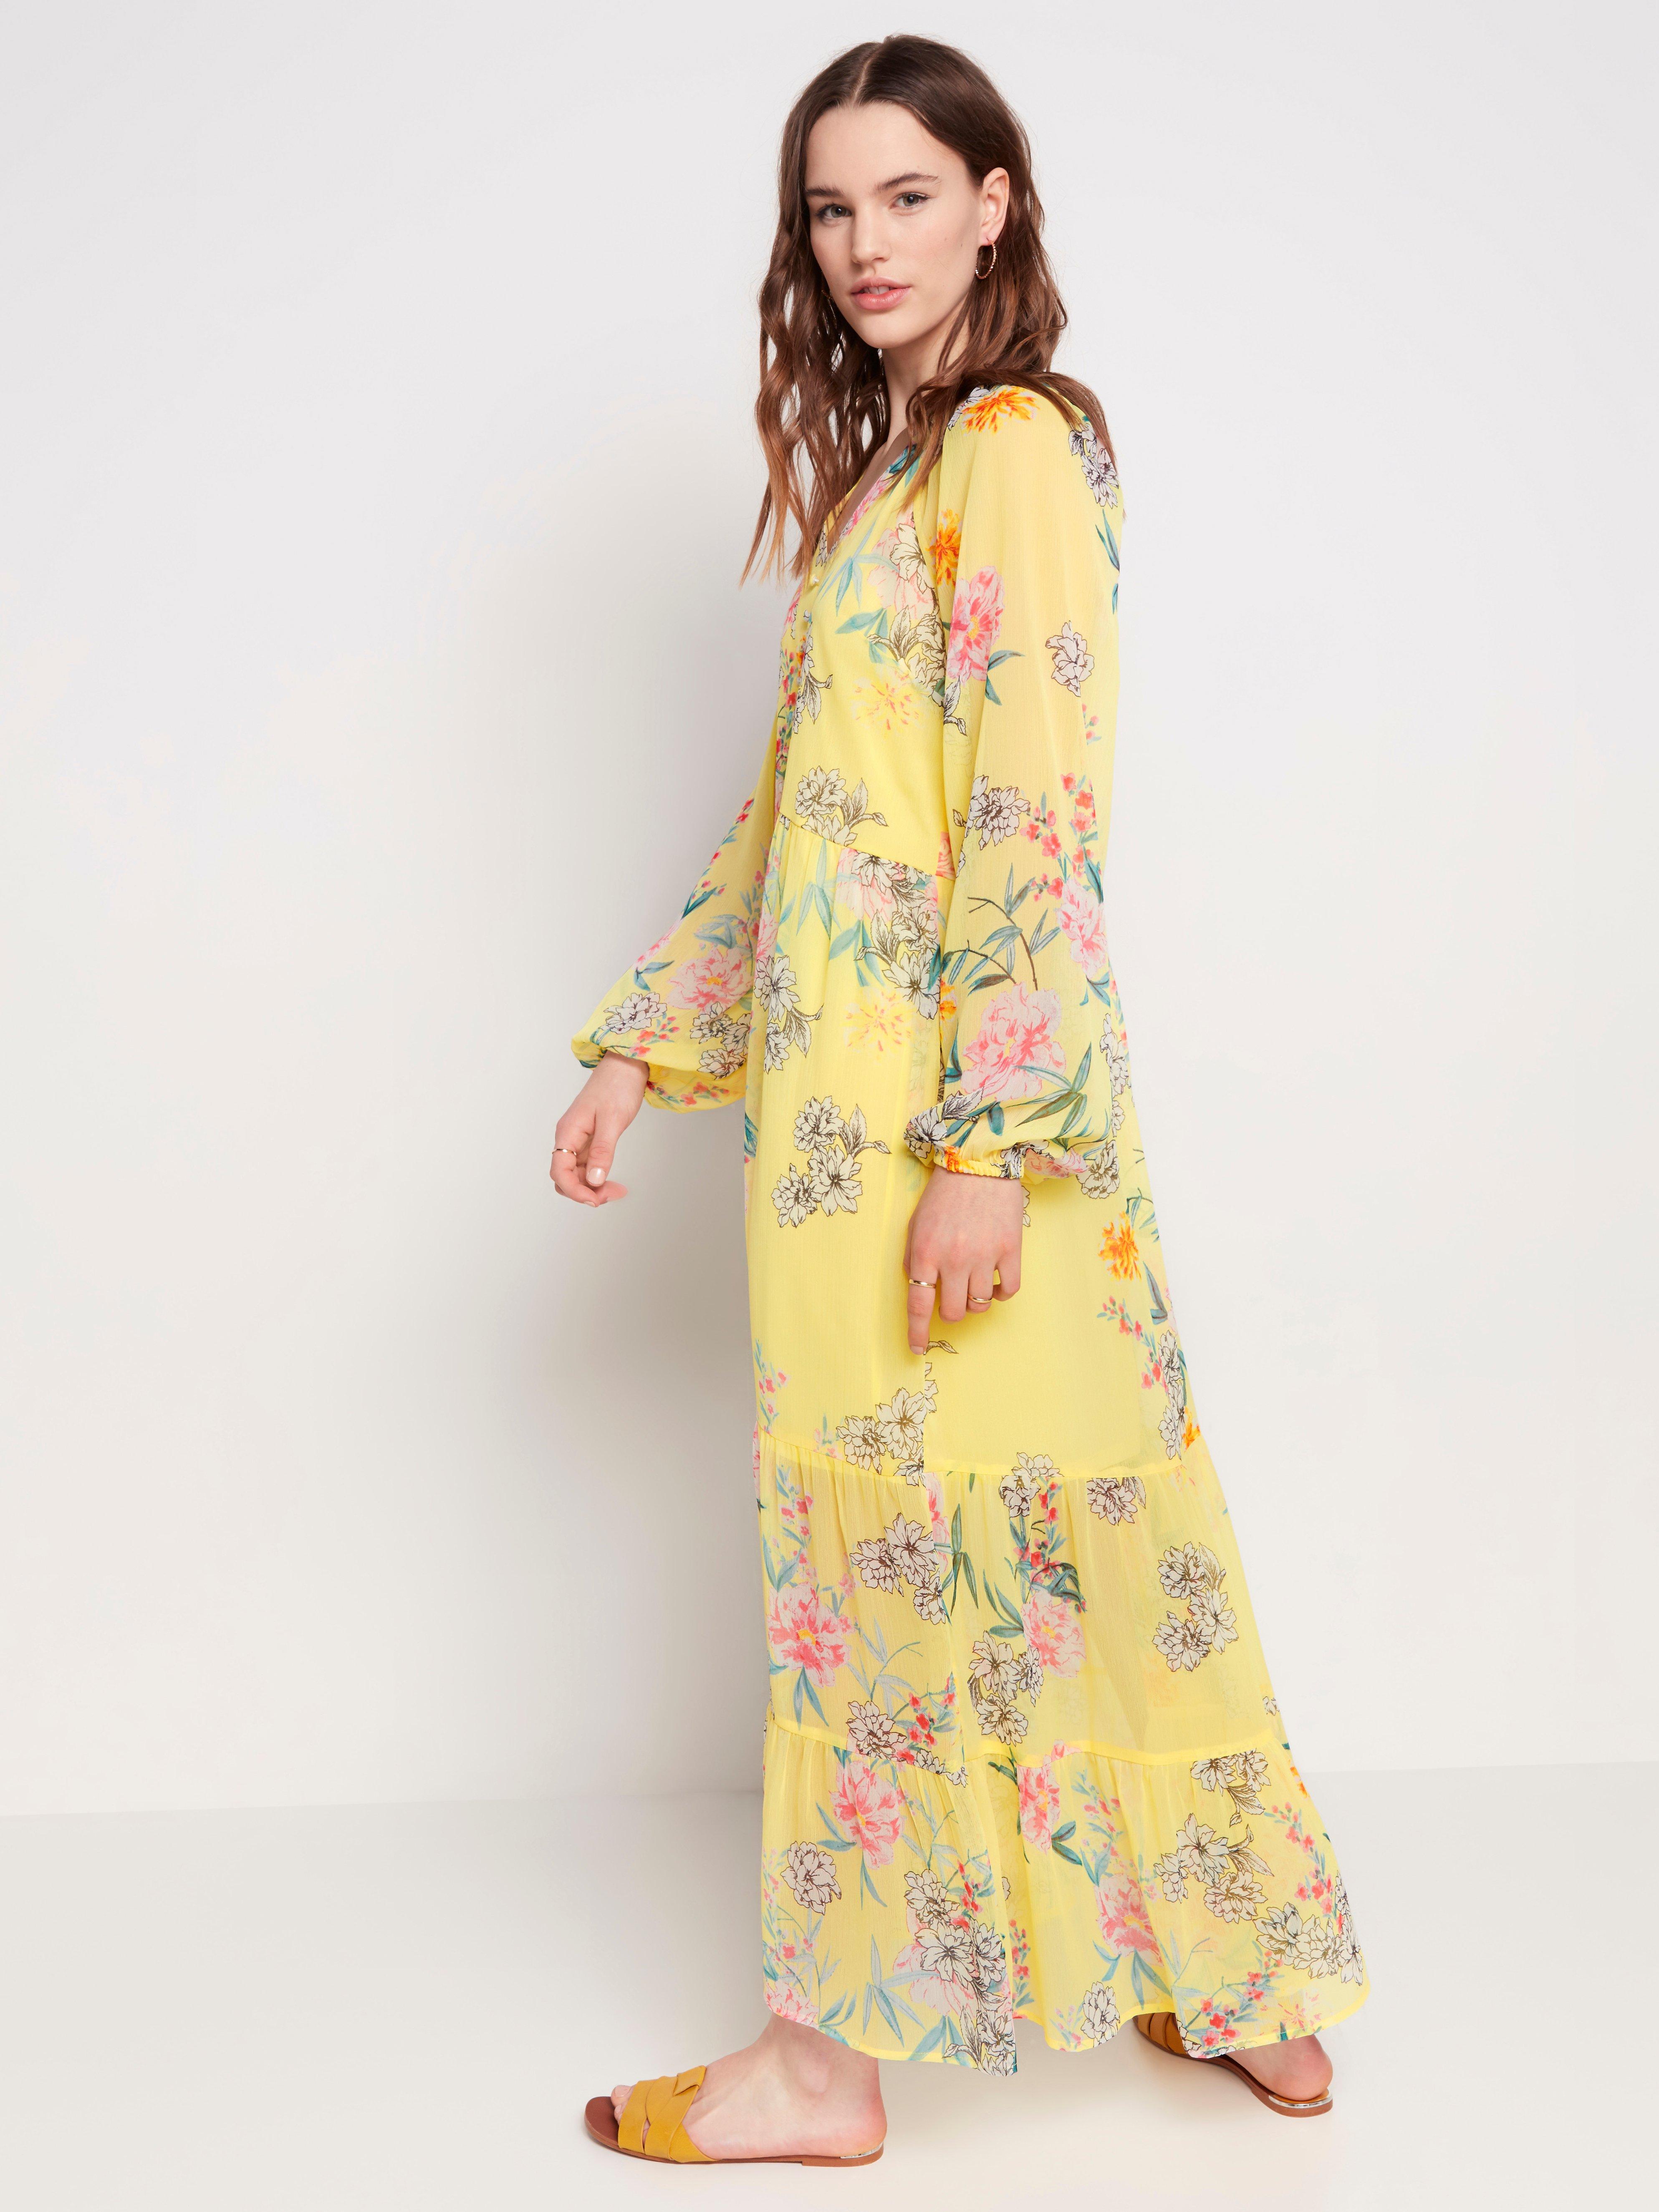 Yellow chiffon maxi dress with floral ...